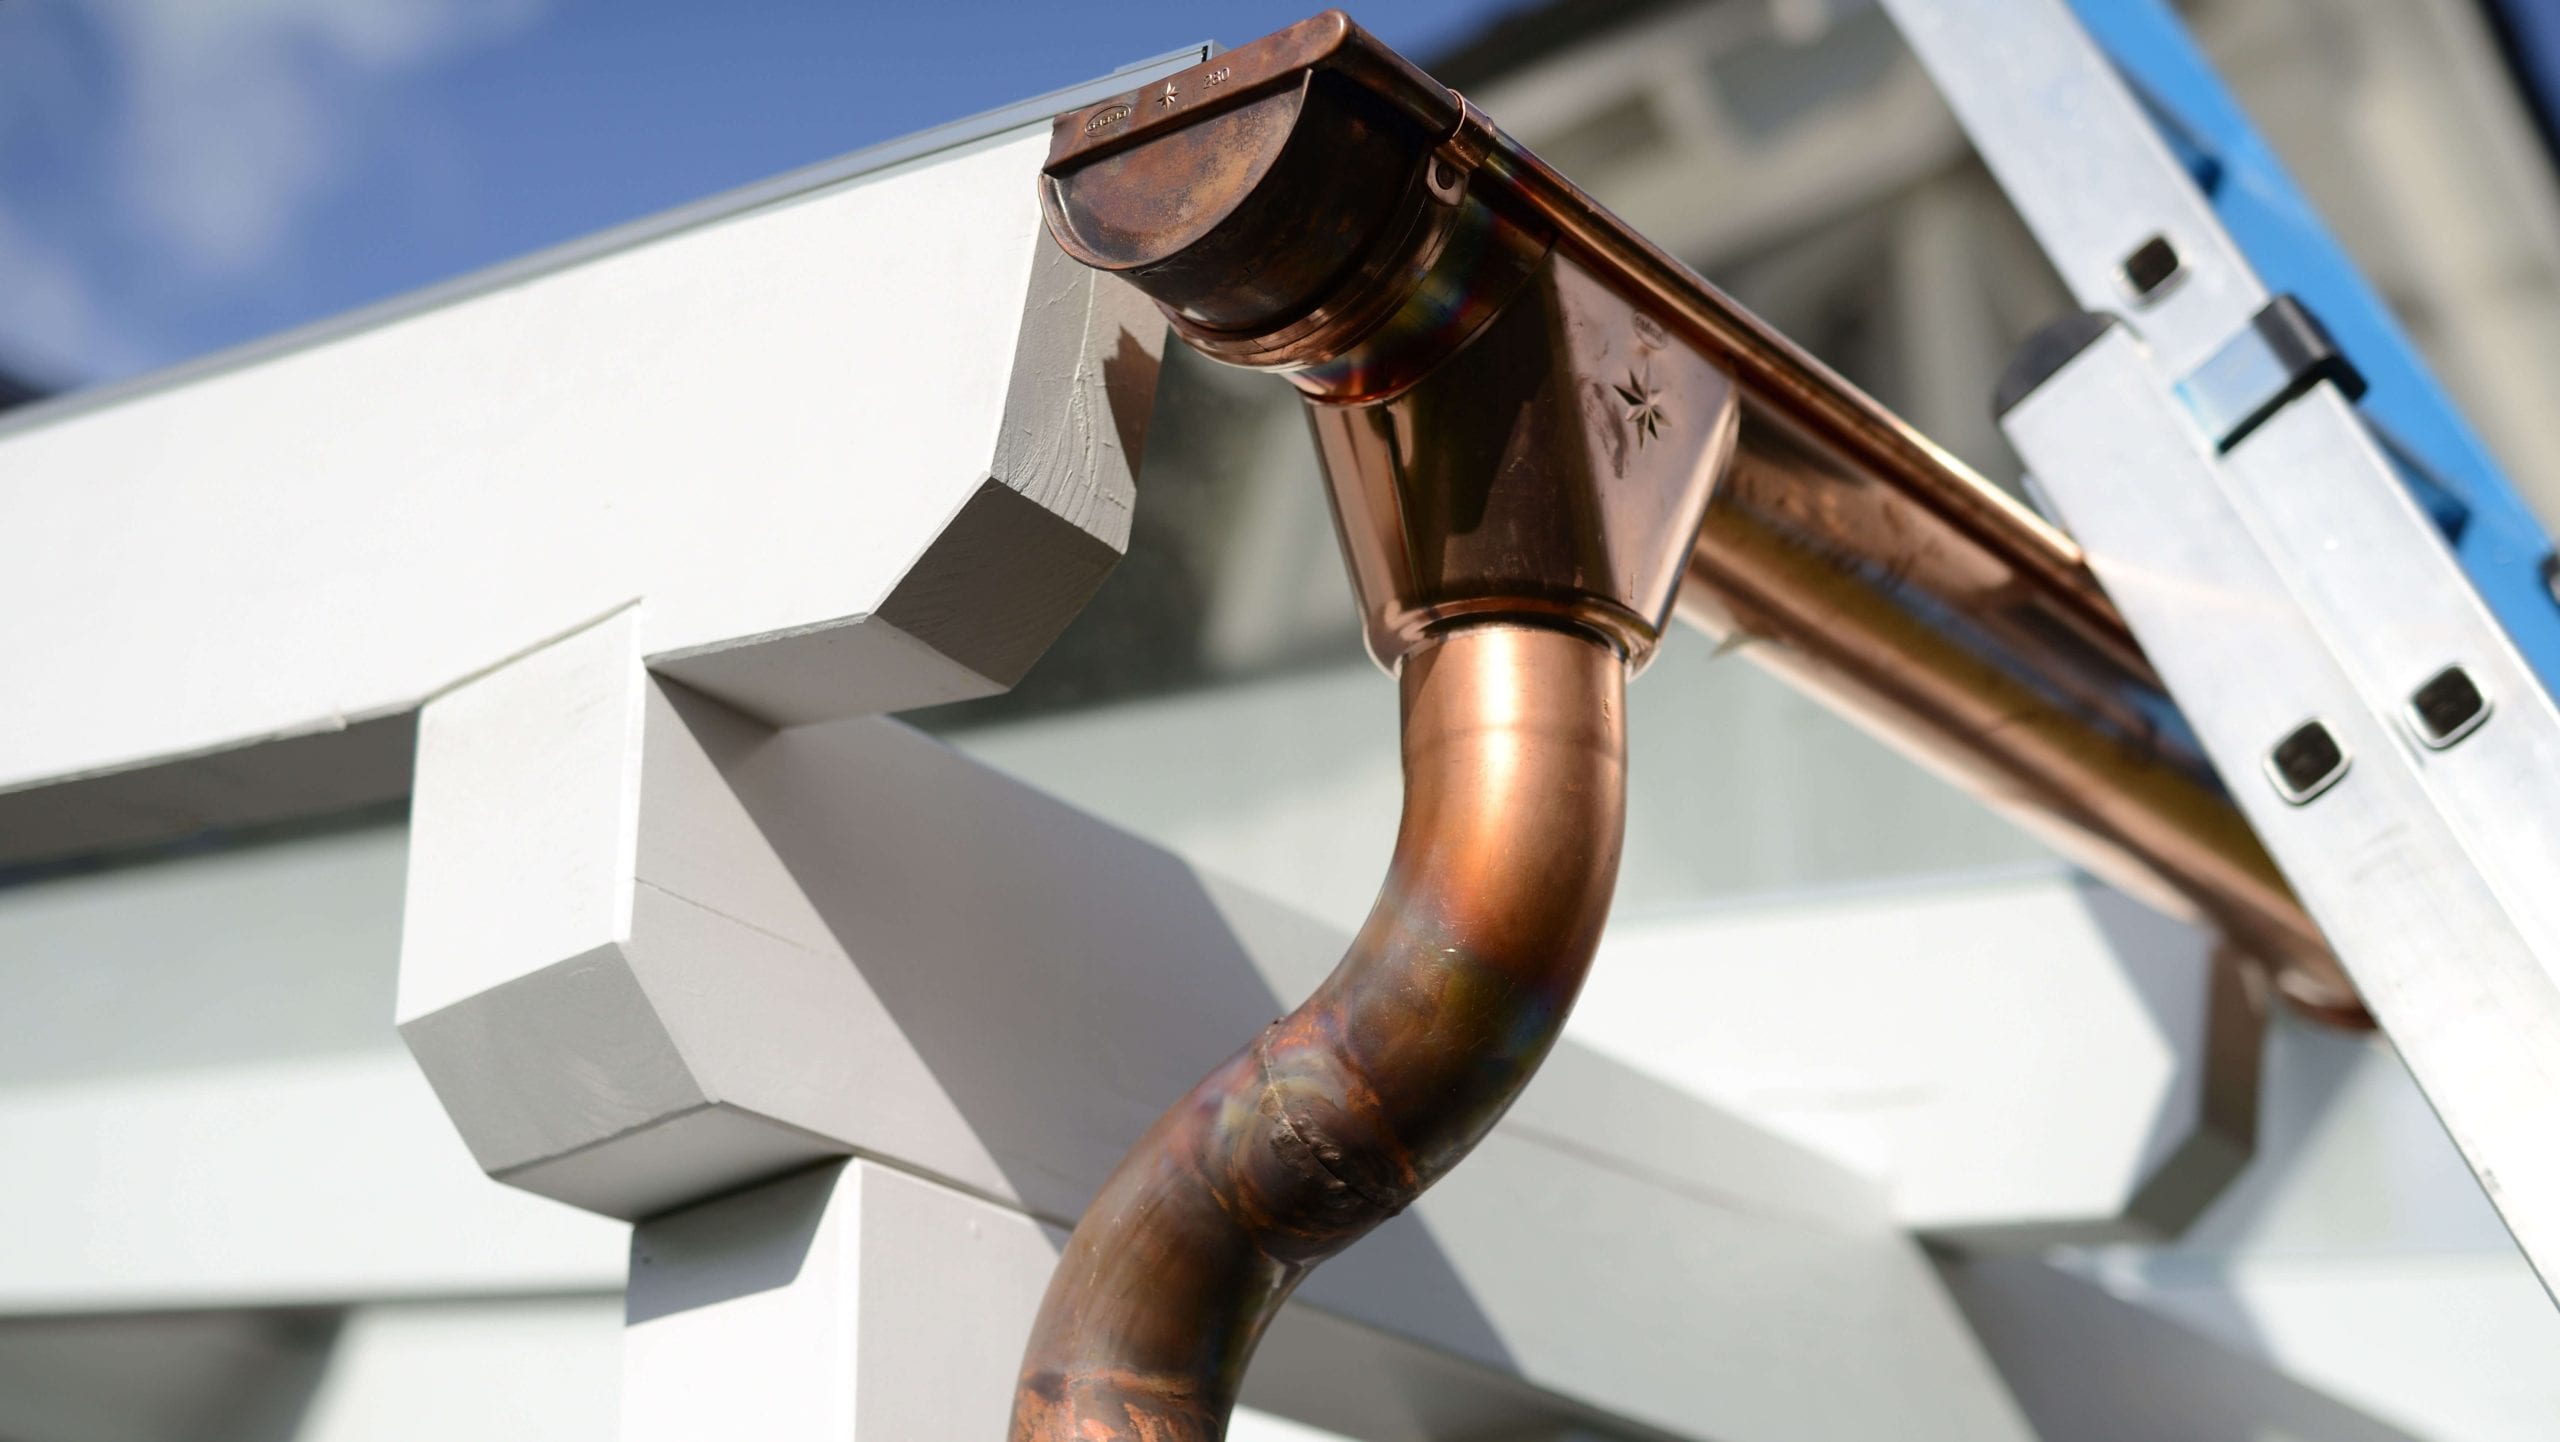 Make your property stand out with copper gutters. Contact for gutter installation in Gainesville